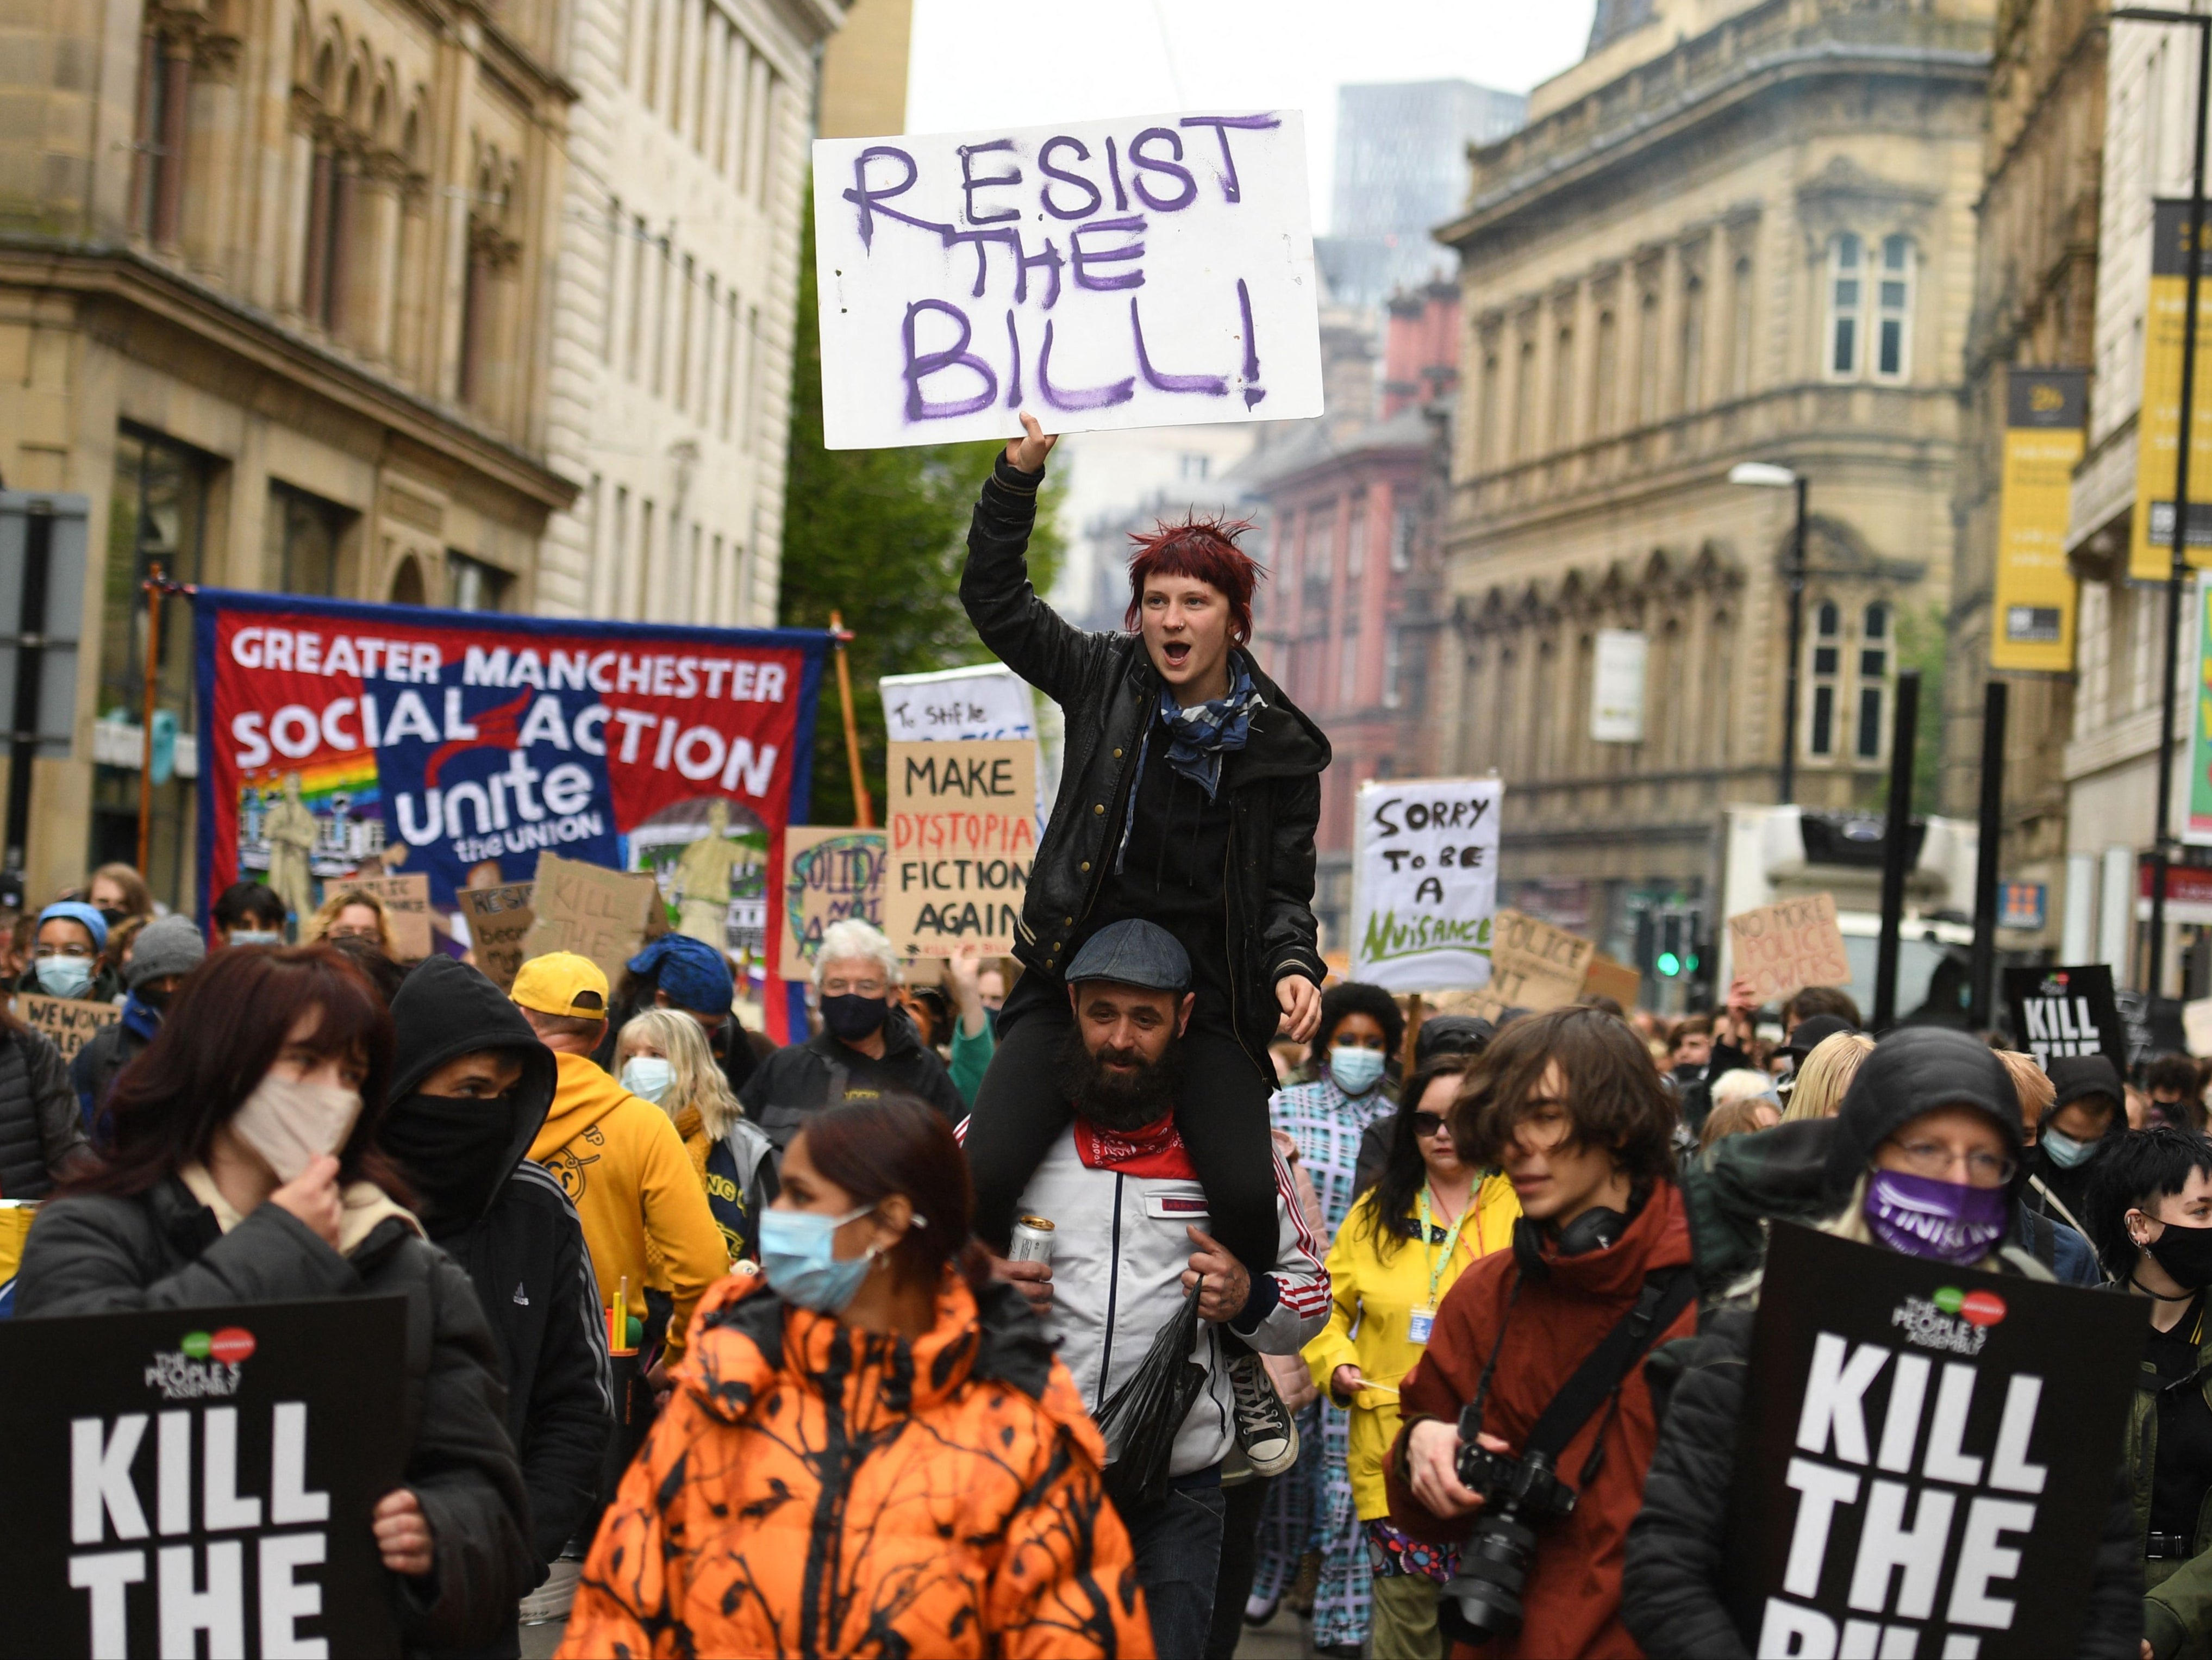 The bill has sparked months of protests across the country